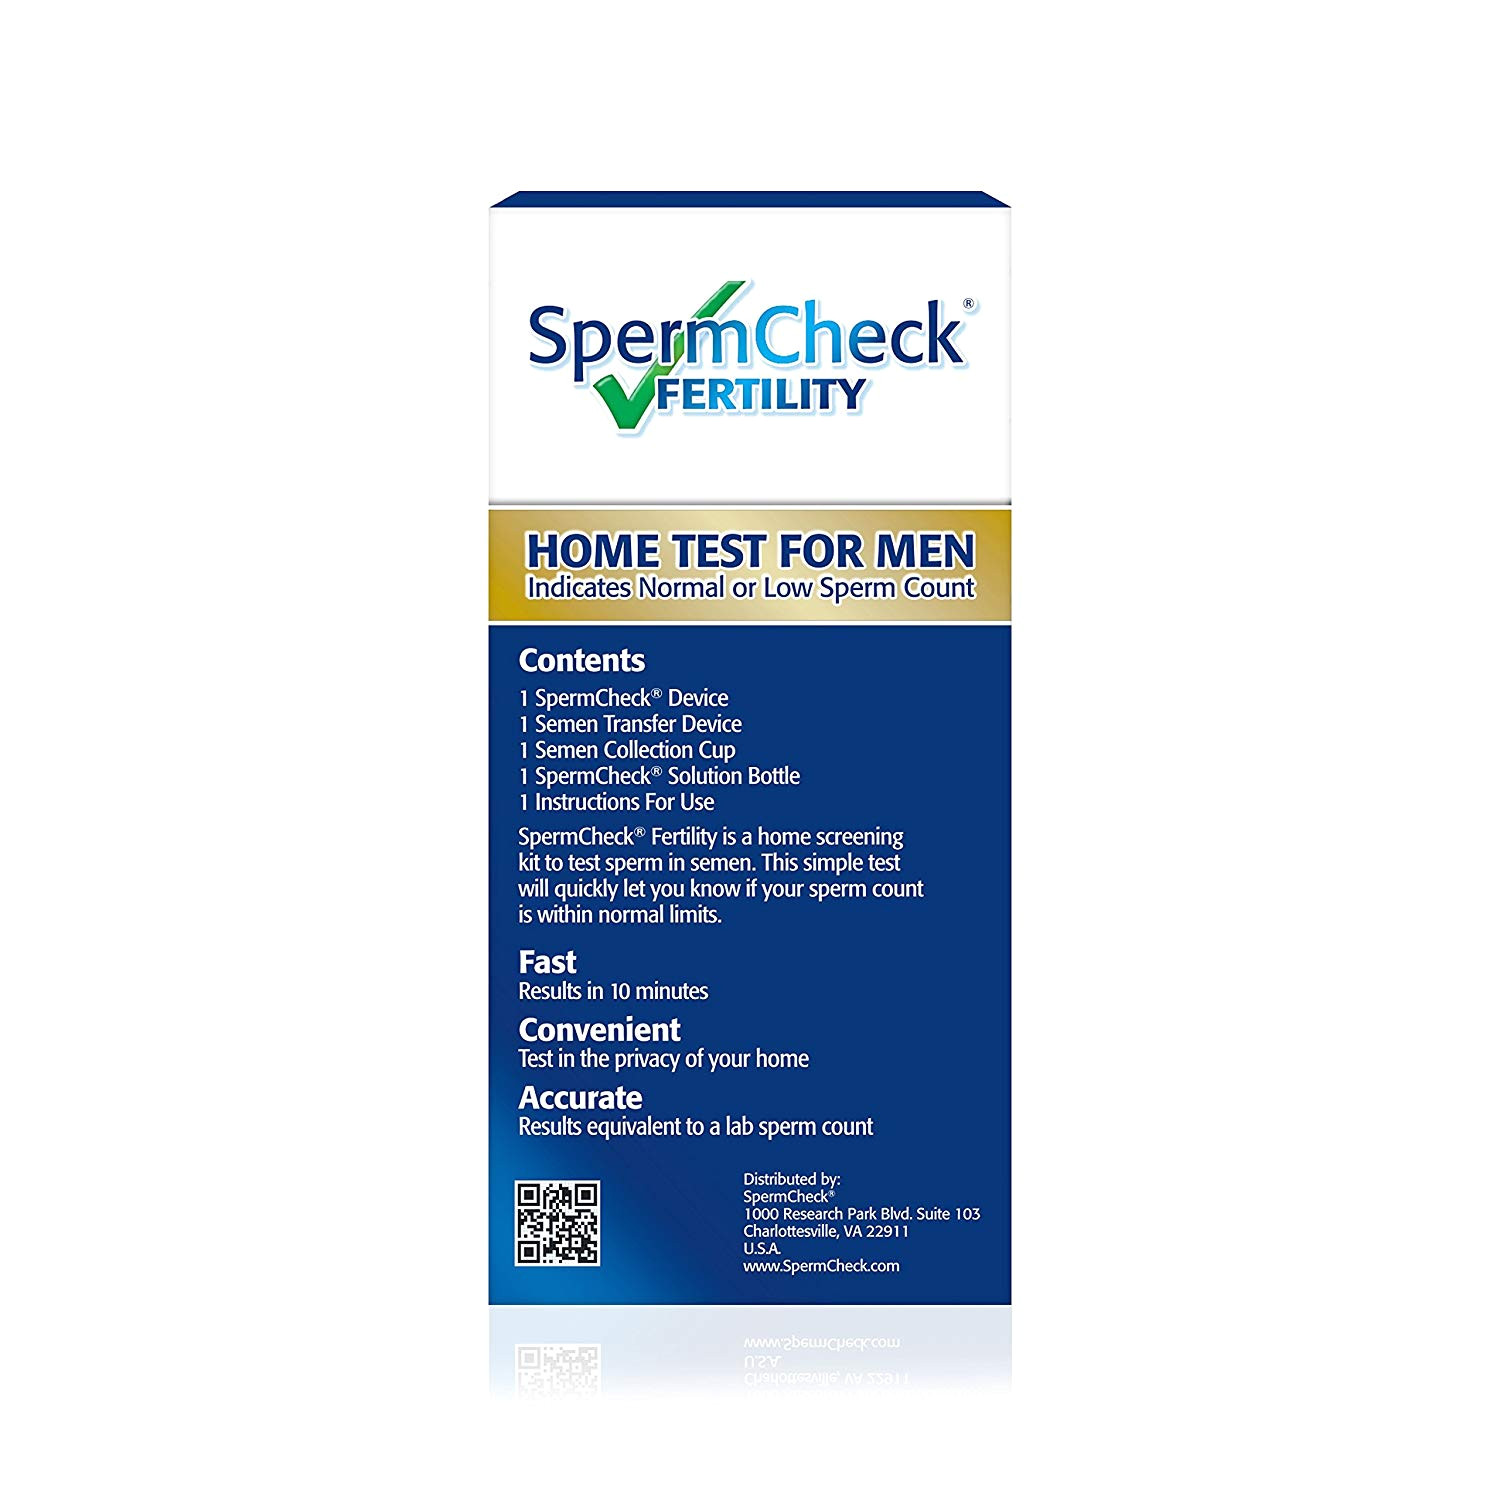 amazon com spermcheck fertility home sperm test kit indicates normal or low sperm count convenient accurate and private easy to read results in 10